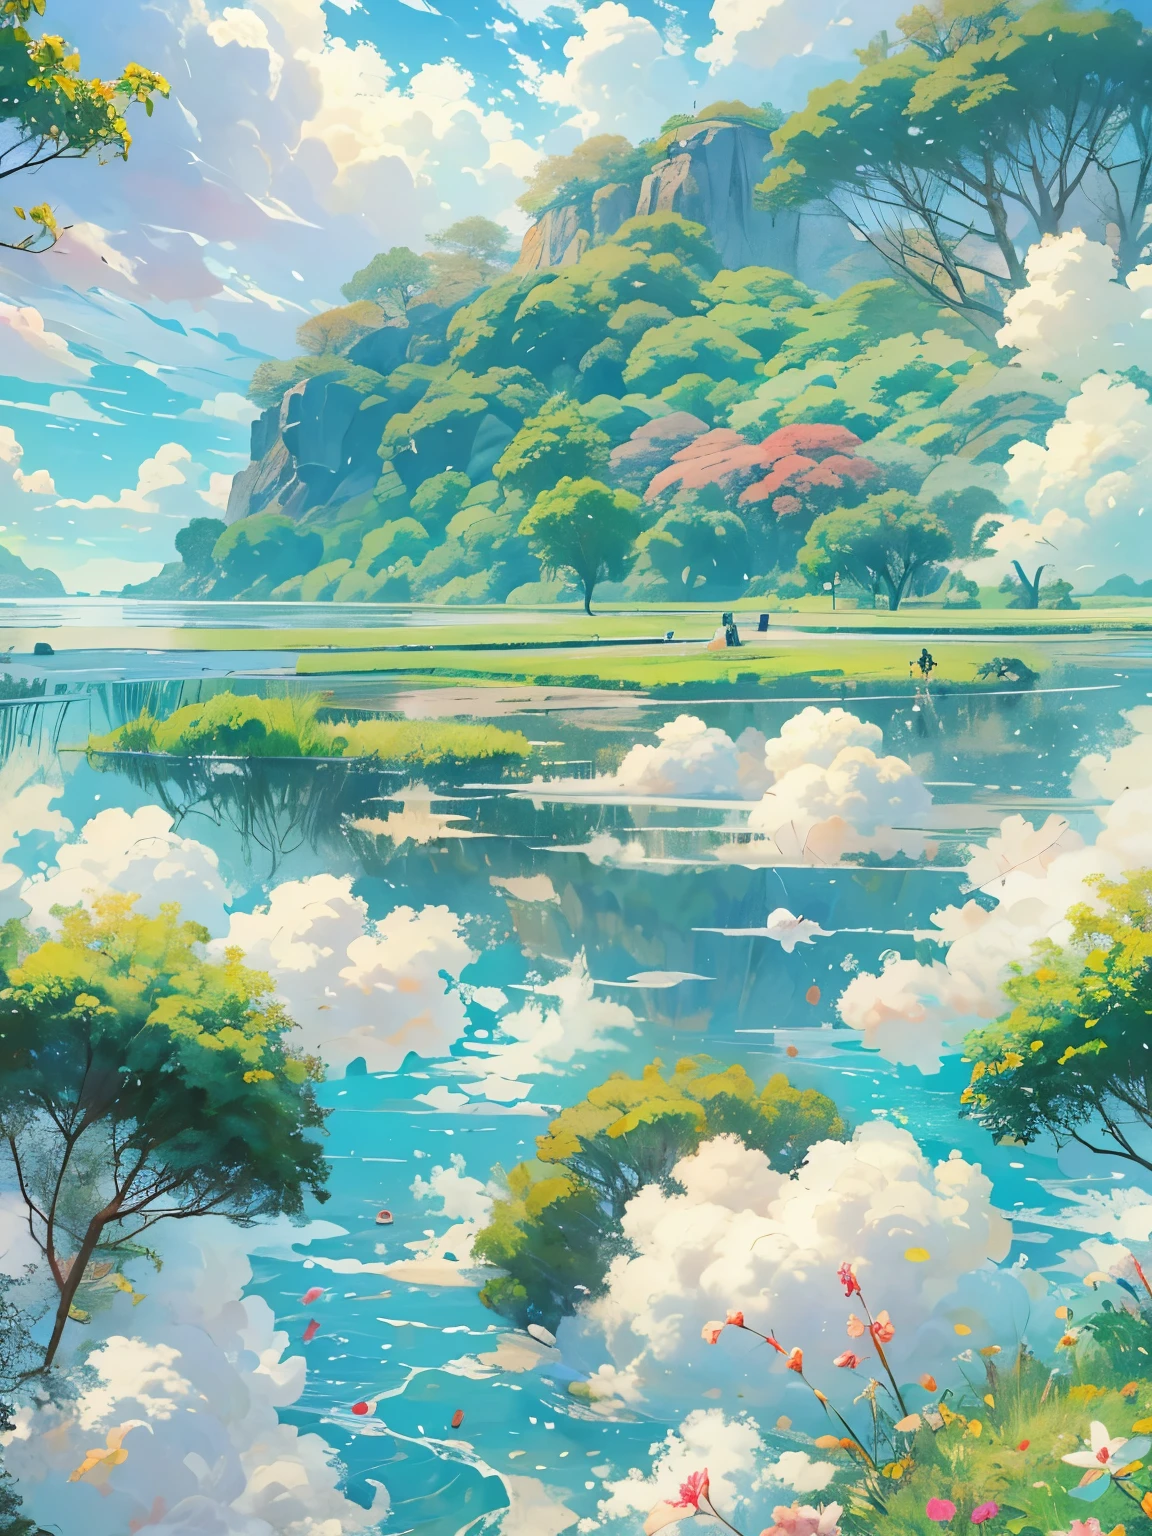 Realistic, Genuine, Beautiful and amazing landscape oil painting Studio Ghibli Hayao Miyazaki;Petal meadow with blue sky and white clouds